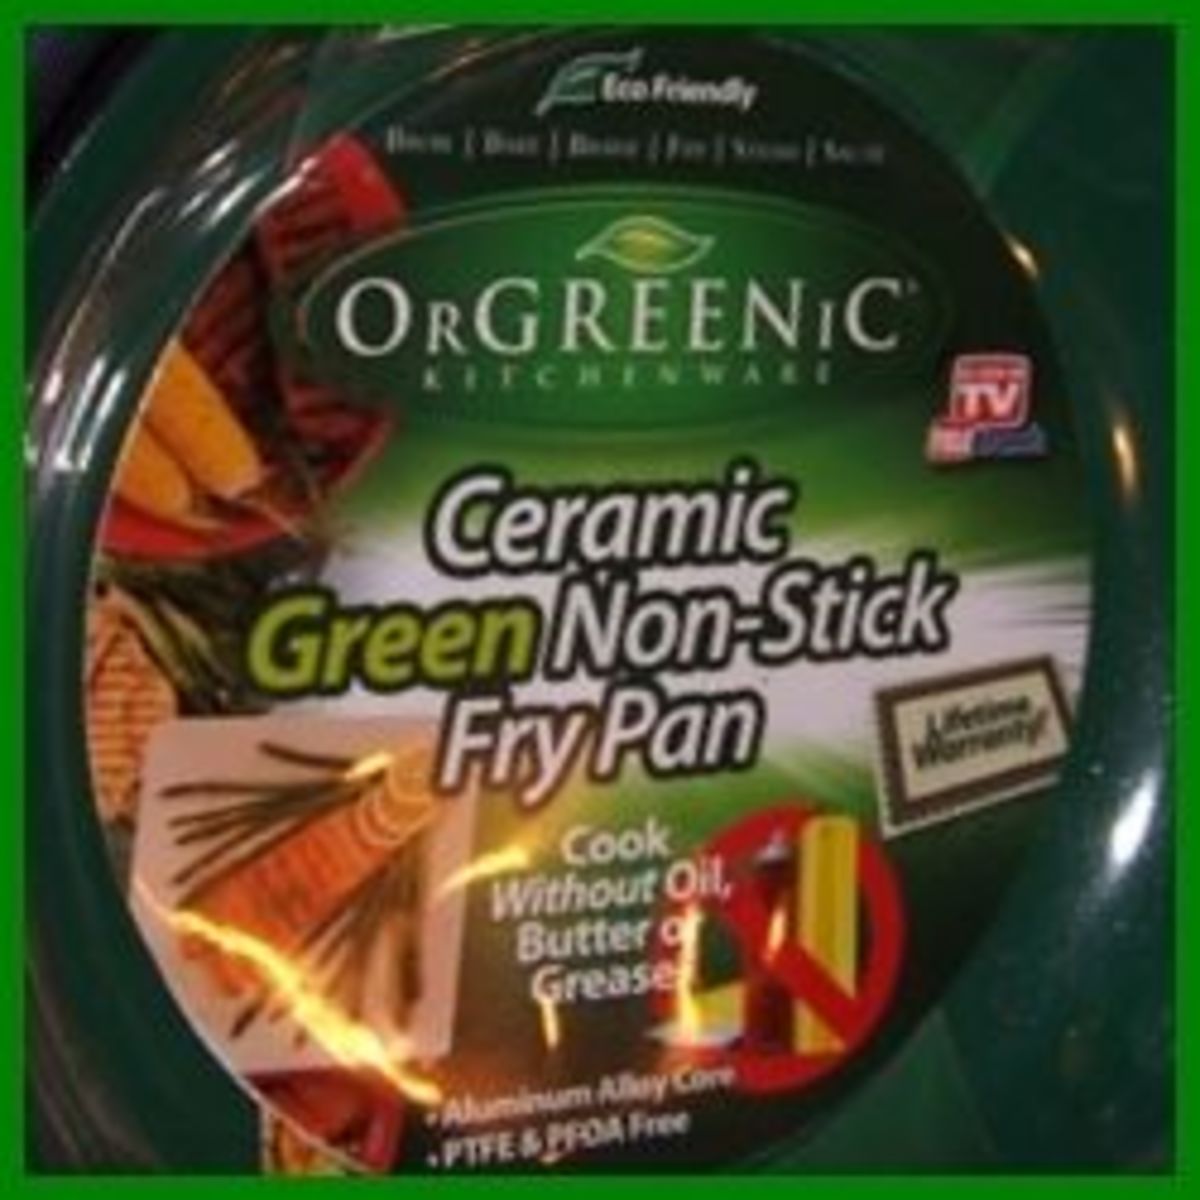 Is the Orgreenic Kitchenware Ceramic Green Non-Stick Fry Pan Worth Buying?